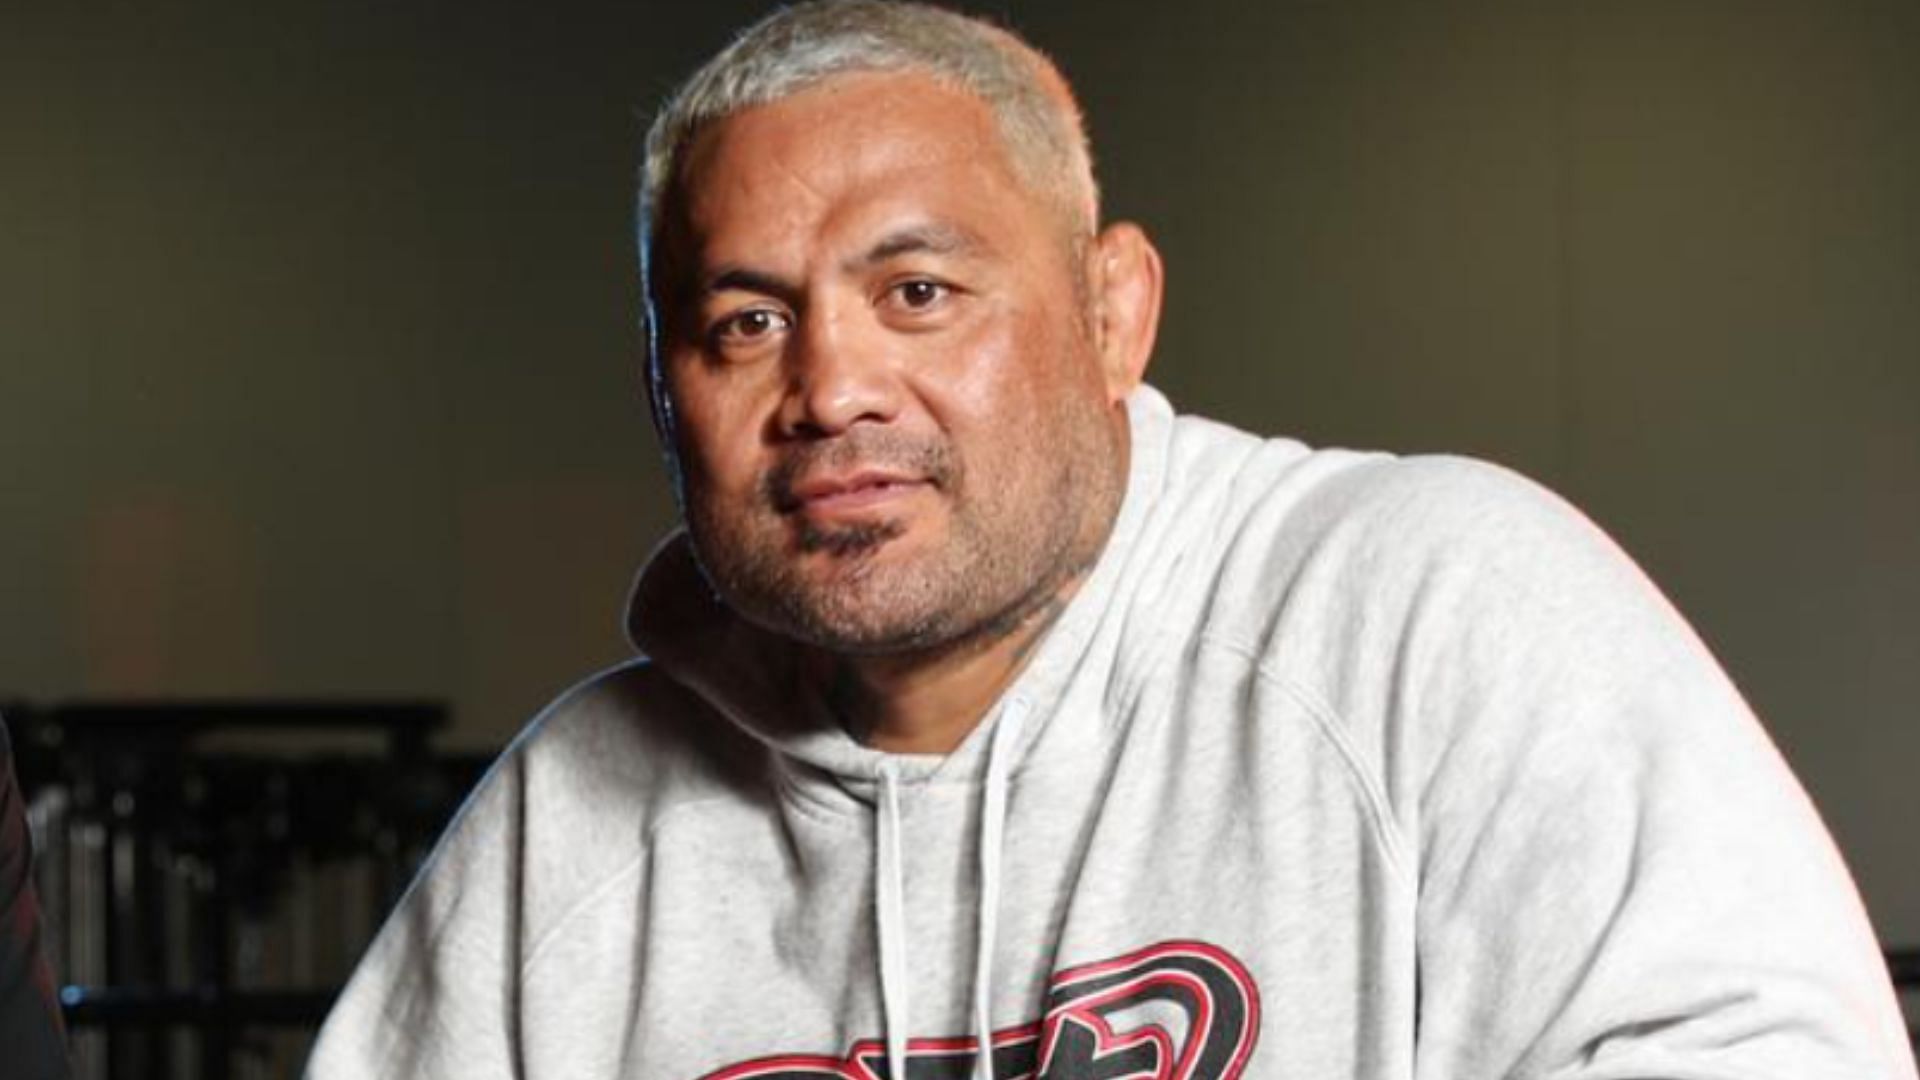 Mark Hunt claims he was &quot;blacklisted&quot; by MMA promotions because of UFC lawsuit  [Image courtesy of @markhuntfighter74 on Instagram]